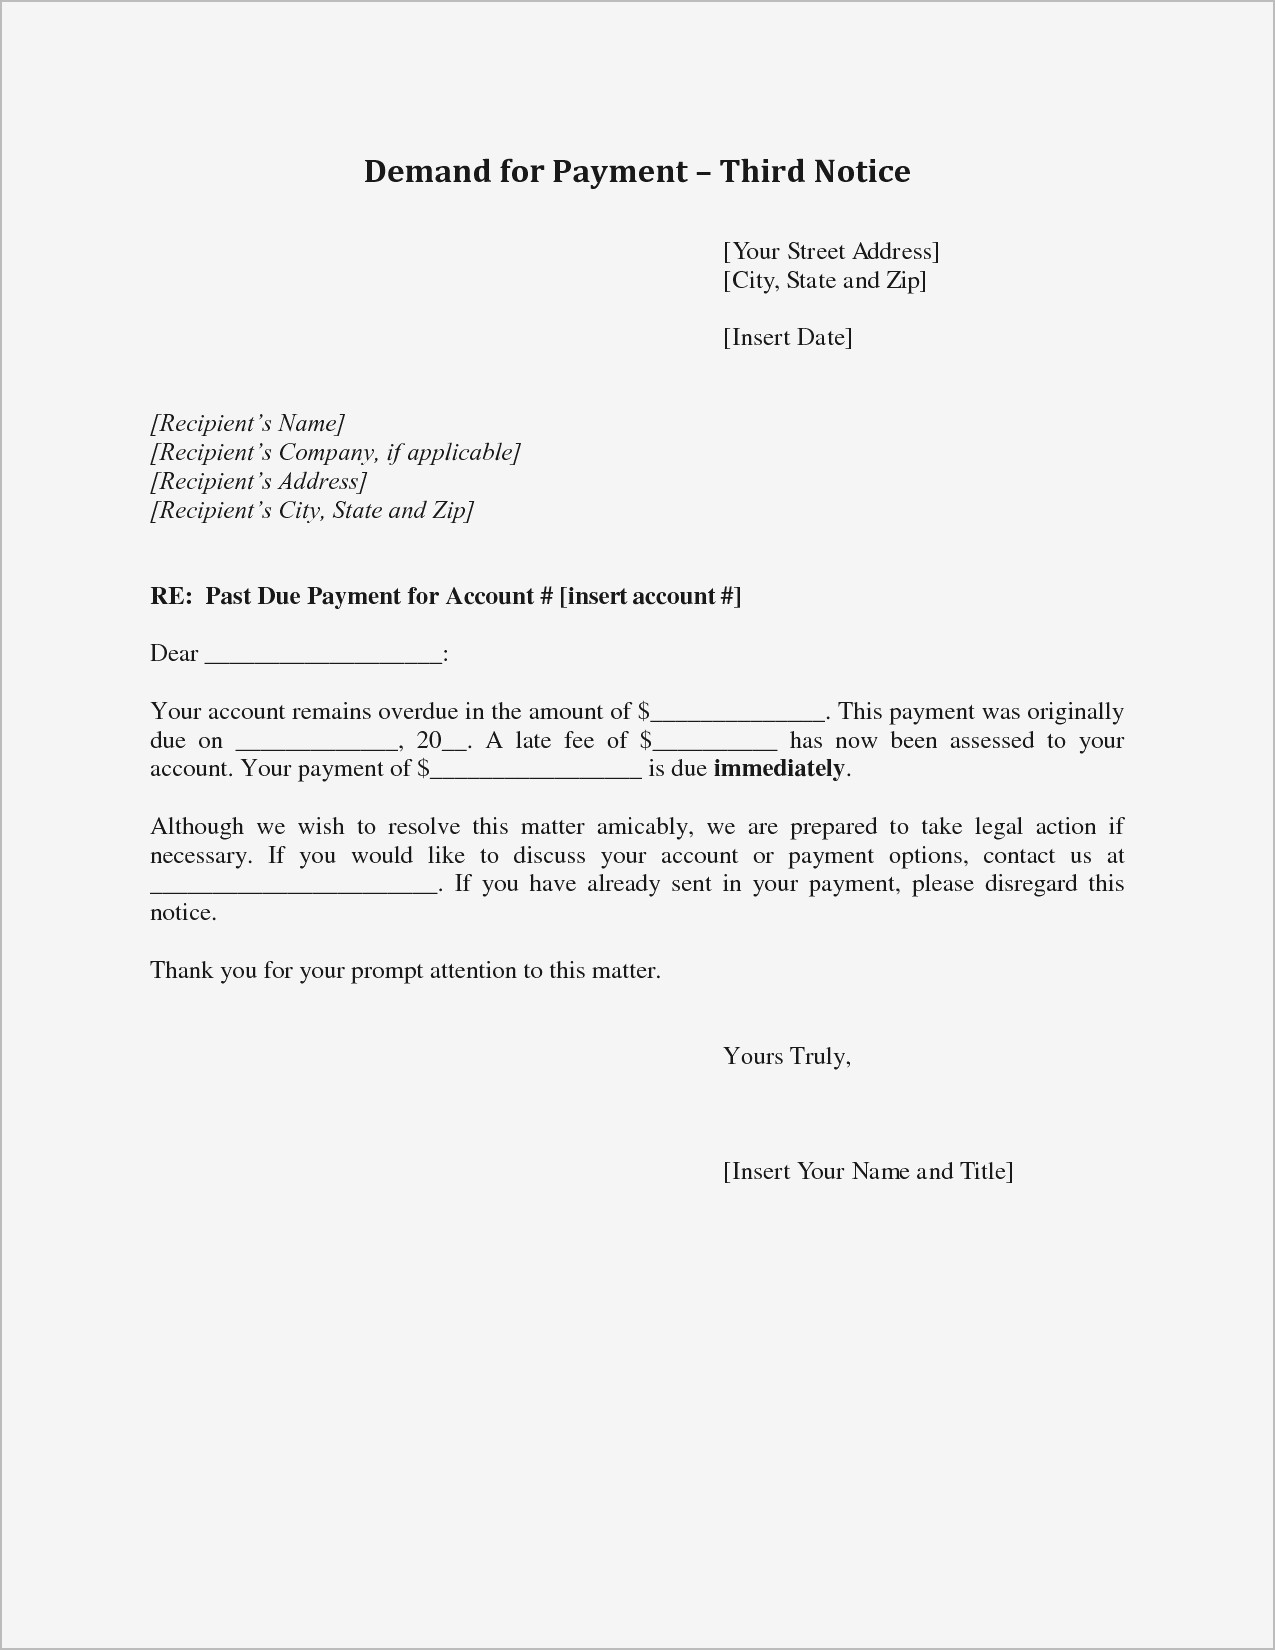 Final Demand for Payment Letter Template - Legal Demand Letter format New Sample Demand Letter for Money Owed